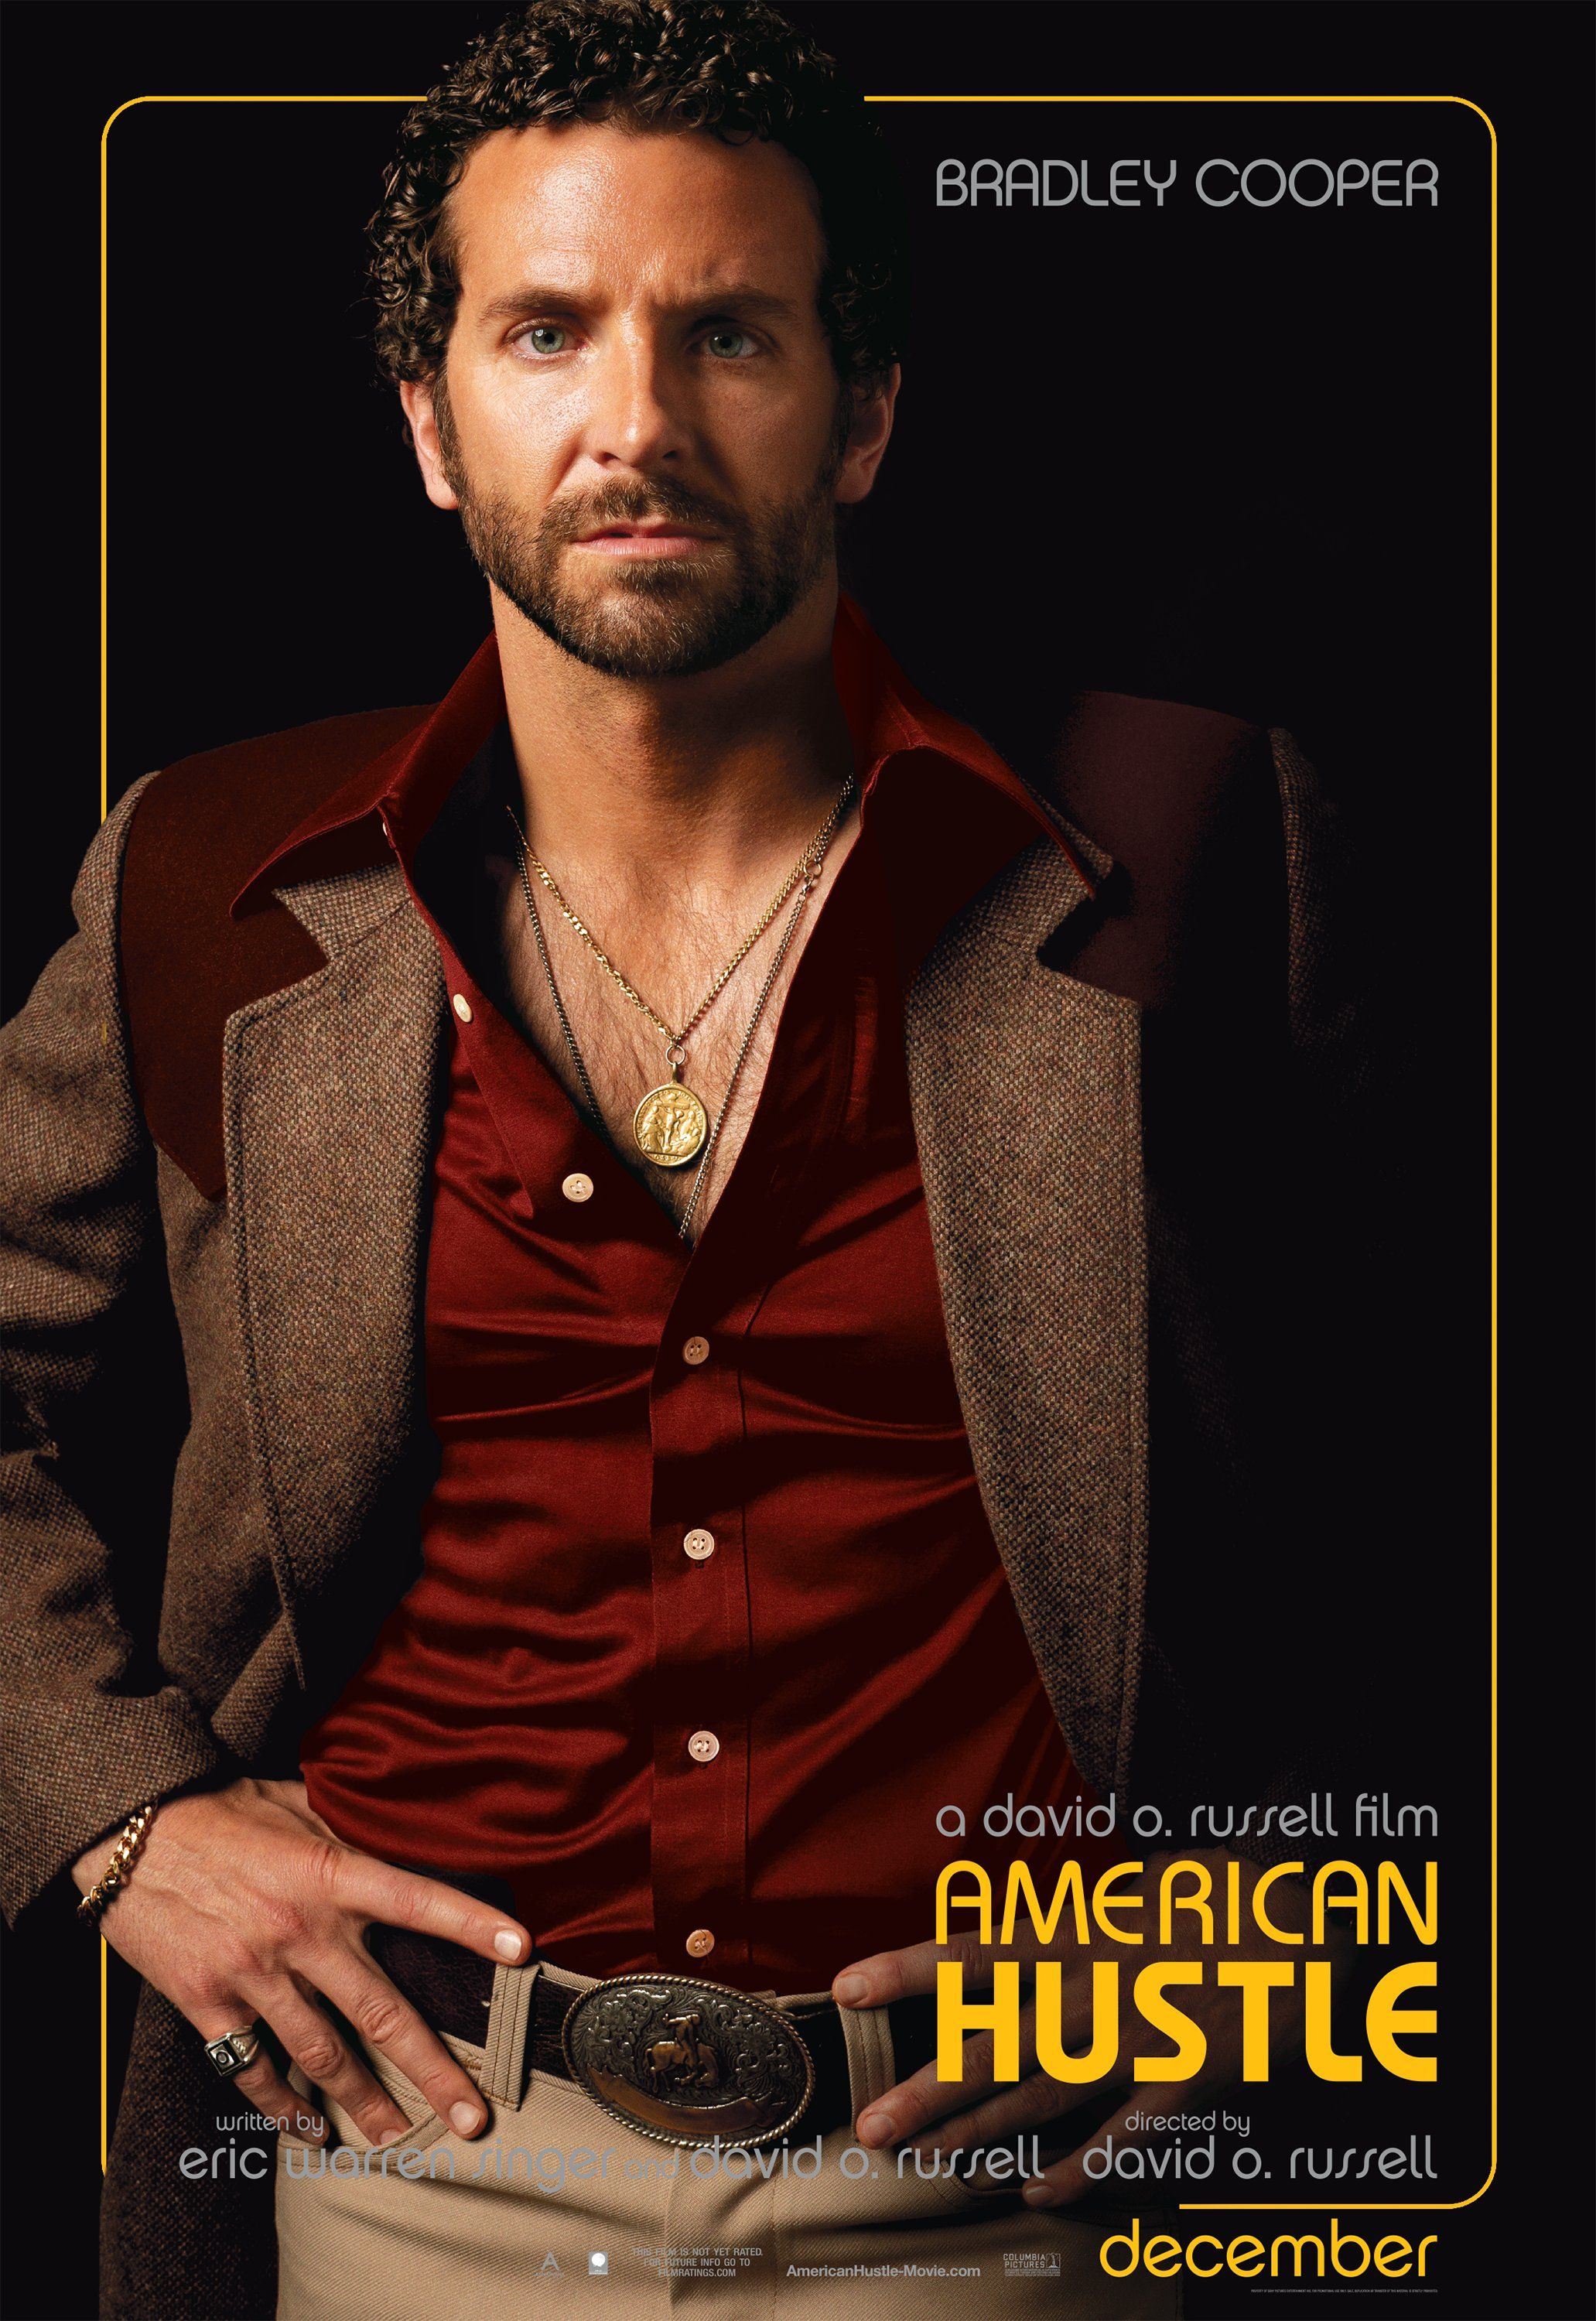 Bradley Cooper Talks AMERICAN HUSTLE, the Perm, GUARDIANS OF THE GALAXY, and More ...